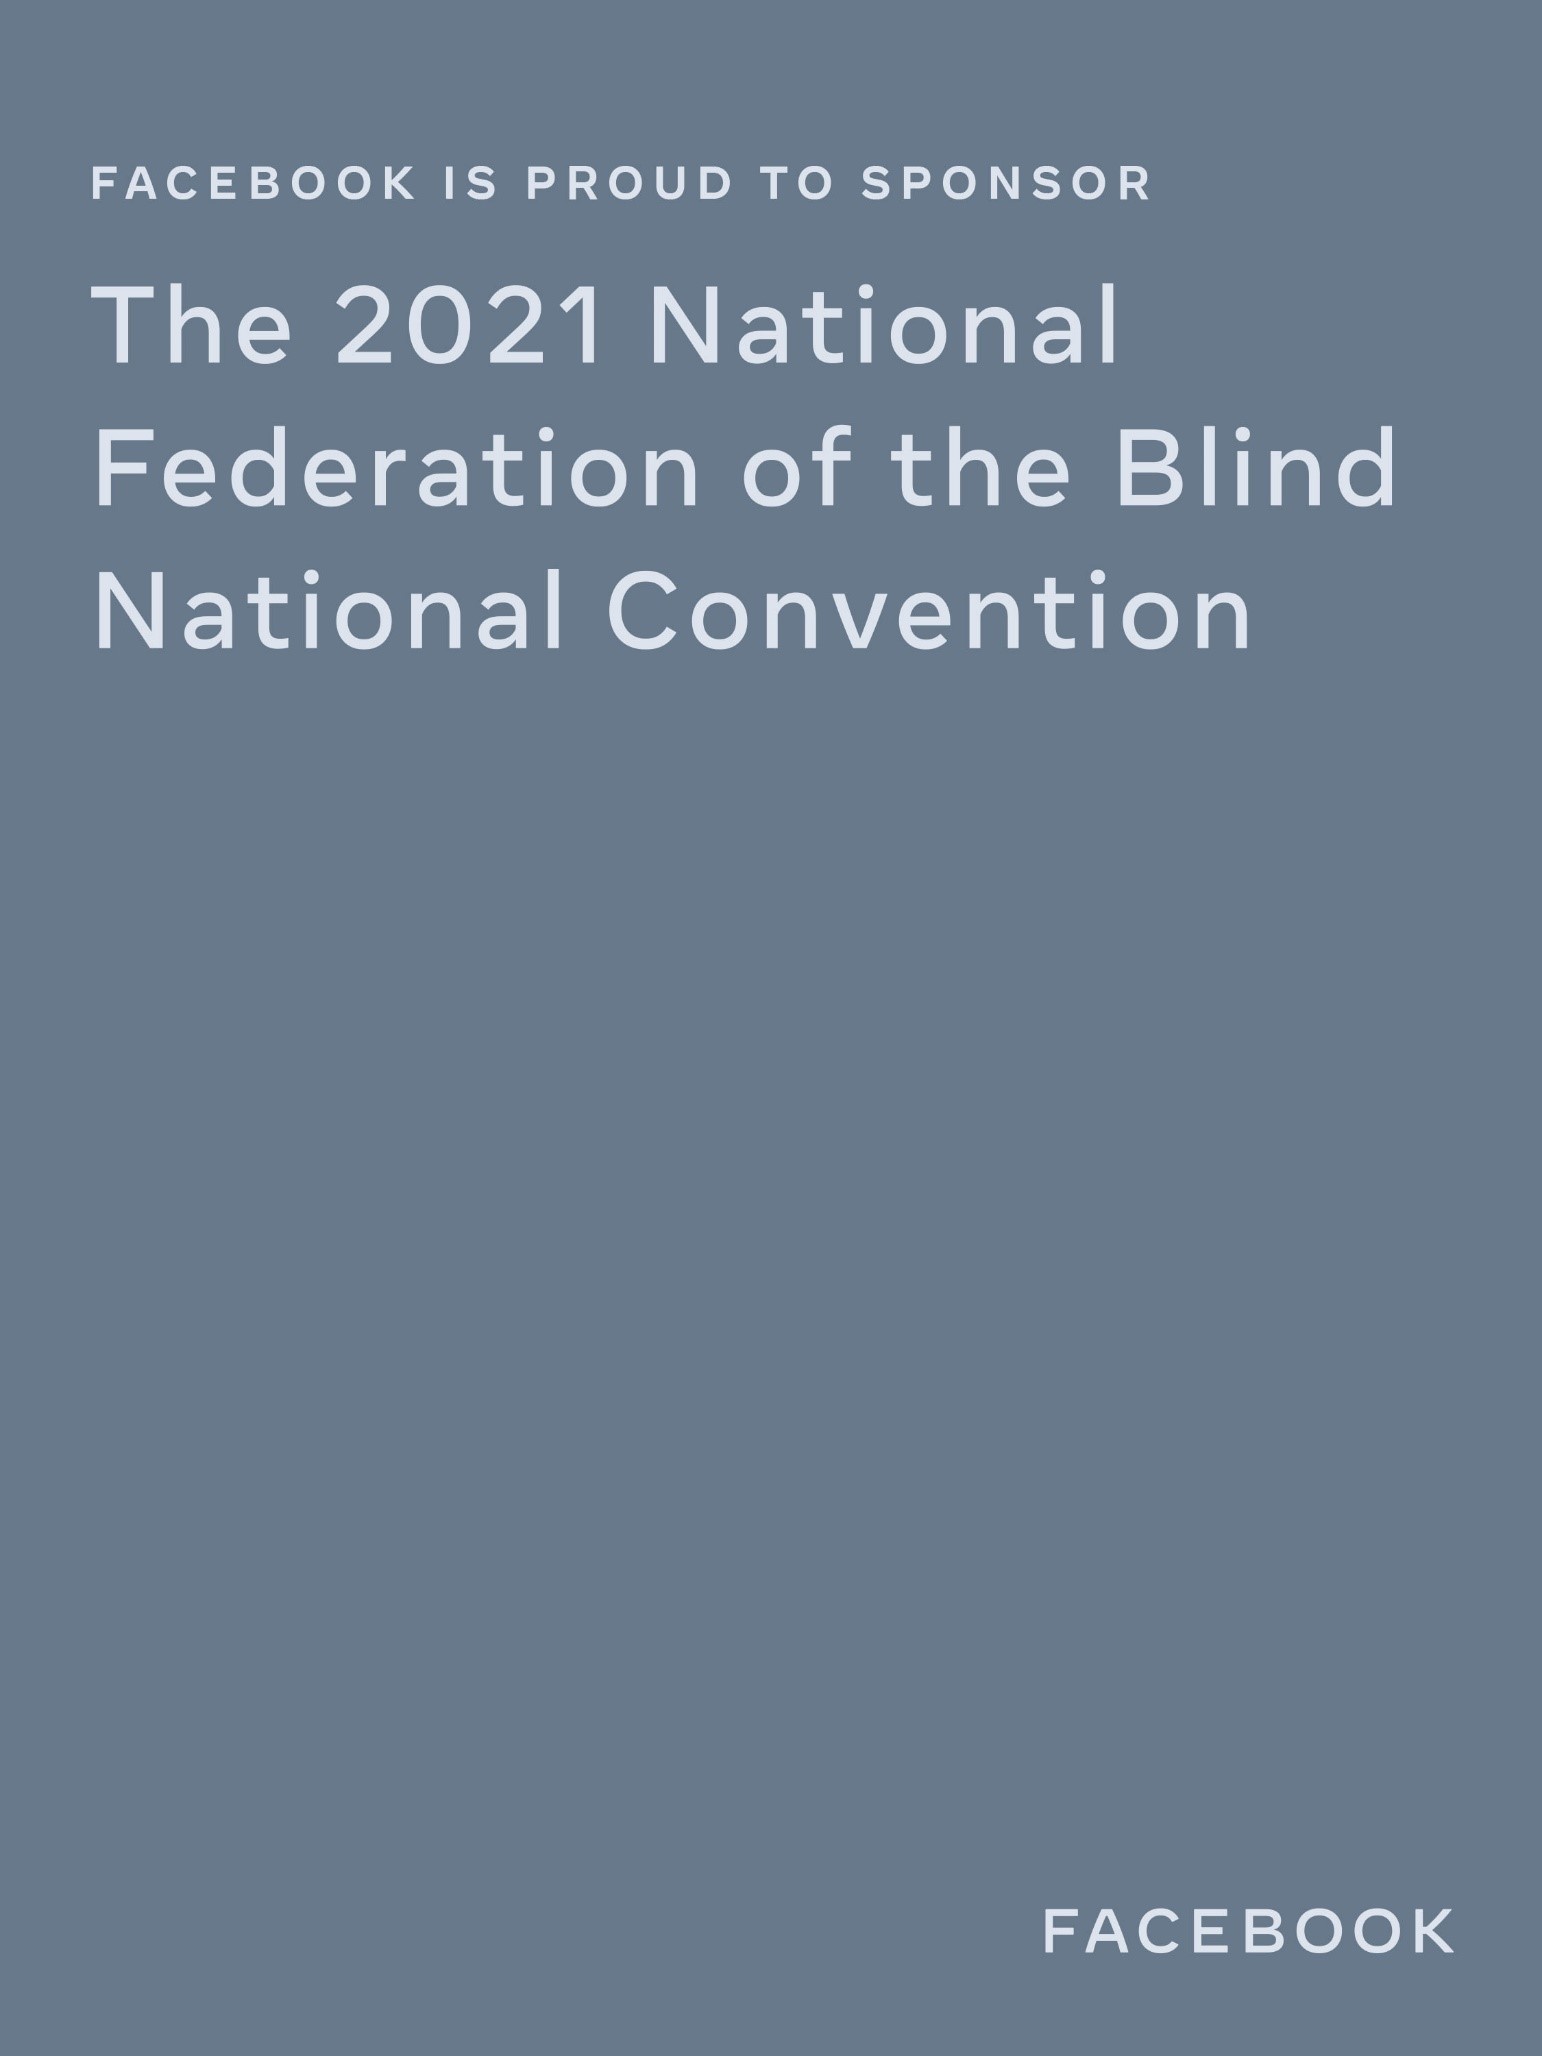 Facebook is proud to sponsor the 2021 National Federation of the Blind National Convention.  https://www.facebook.com/accessibility